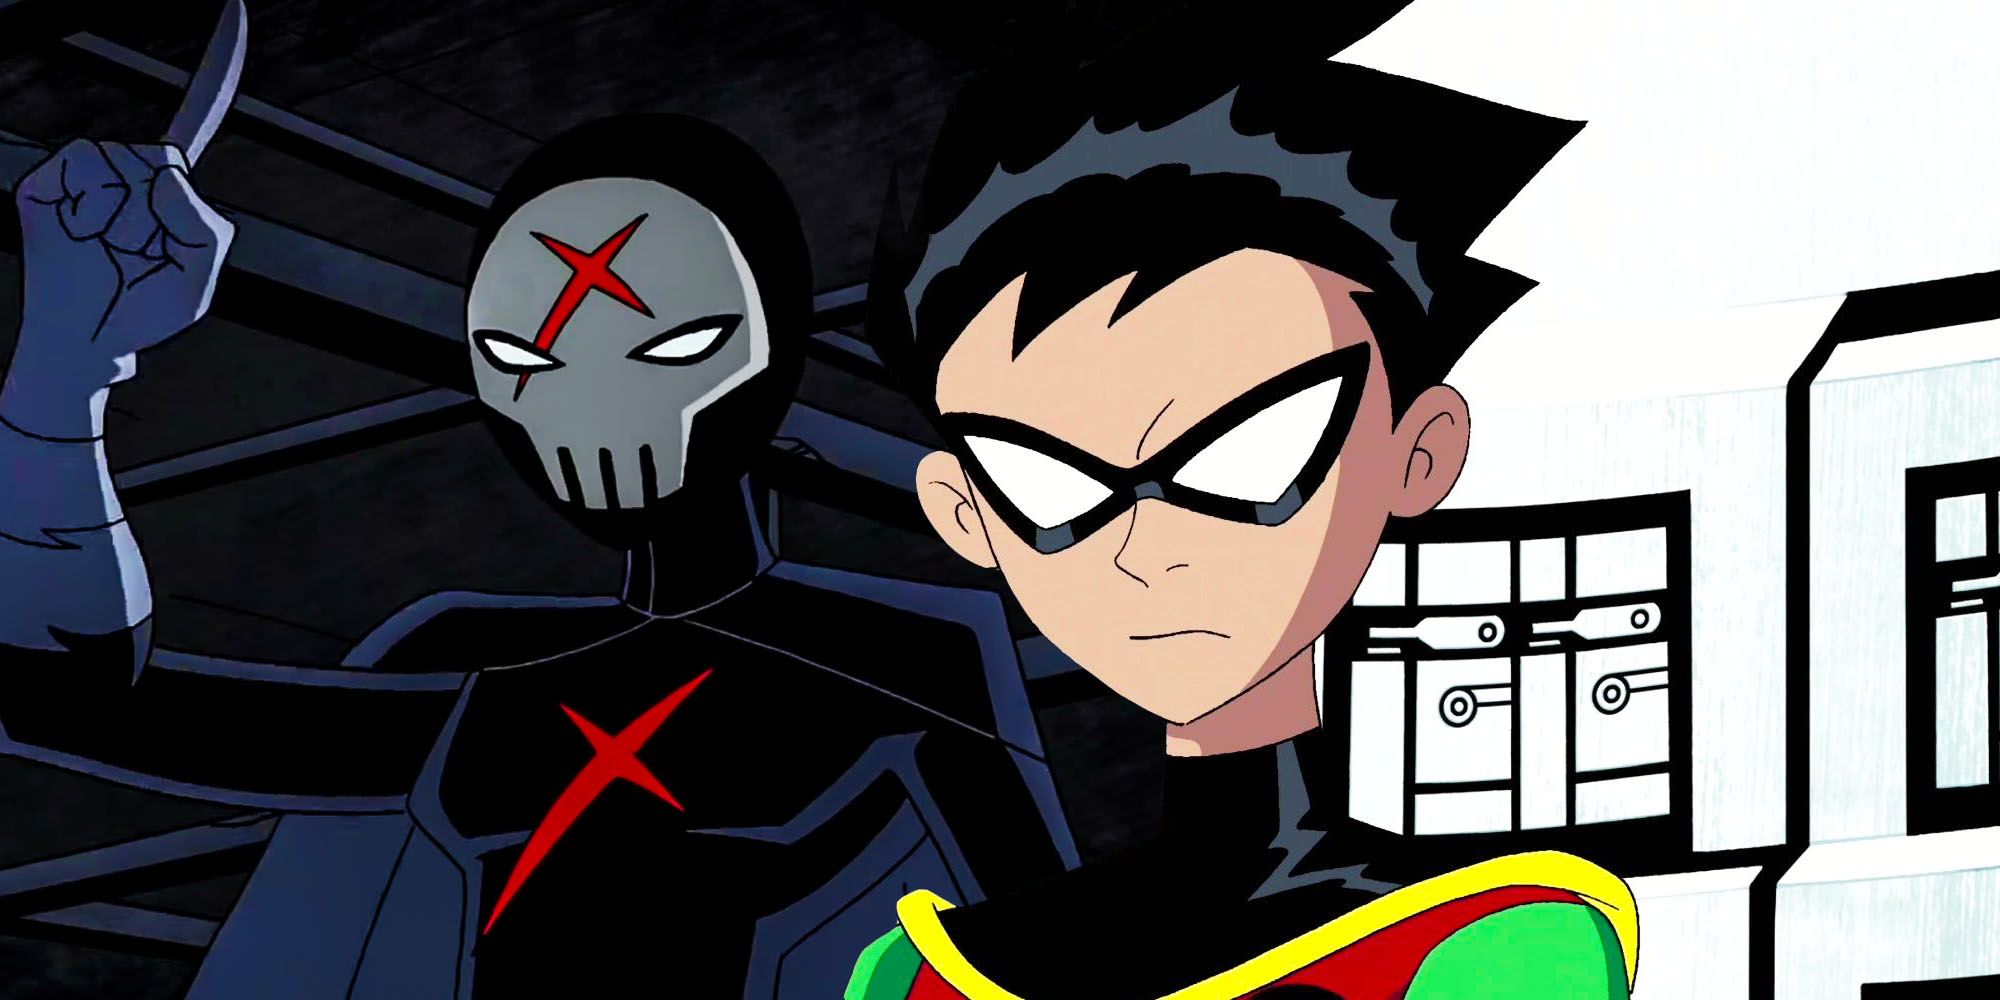 Teen Titans: Red X's Real Identity Is Jason Todd - Theory Explained